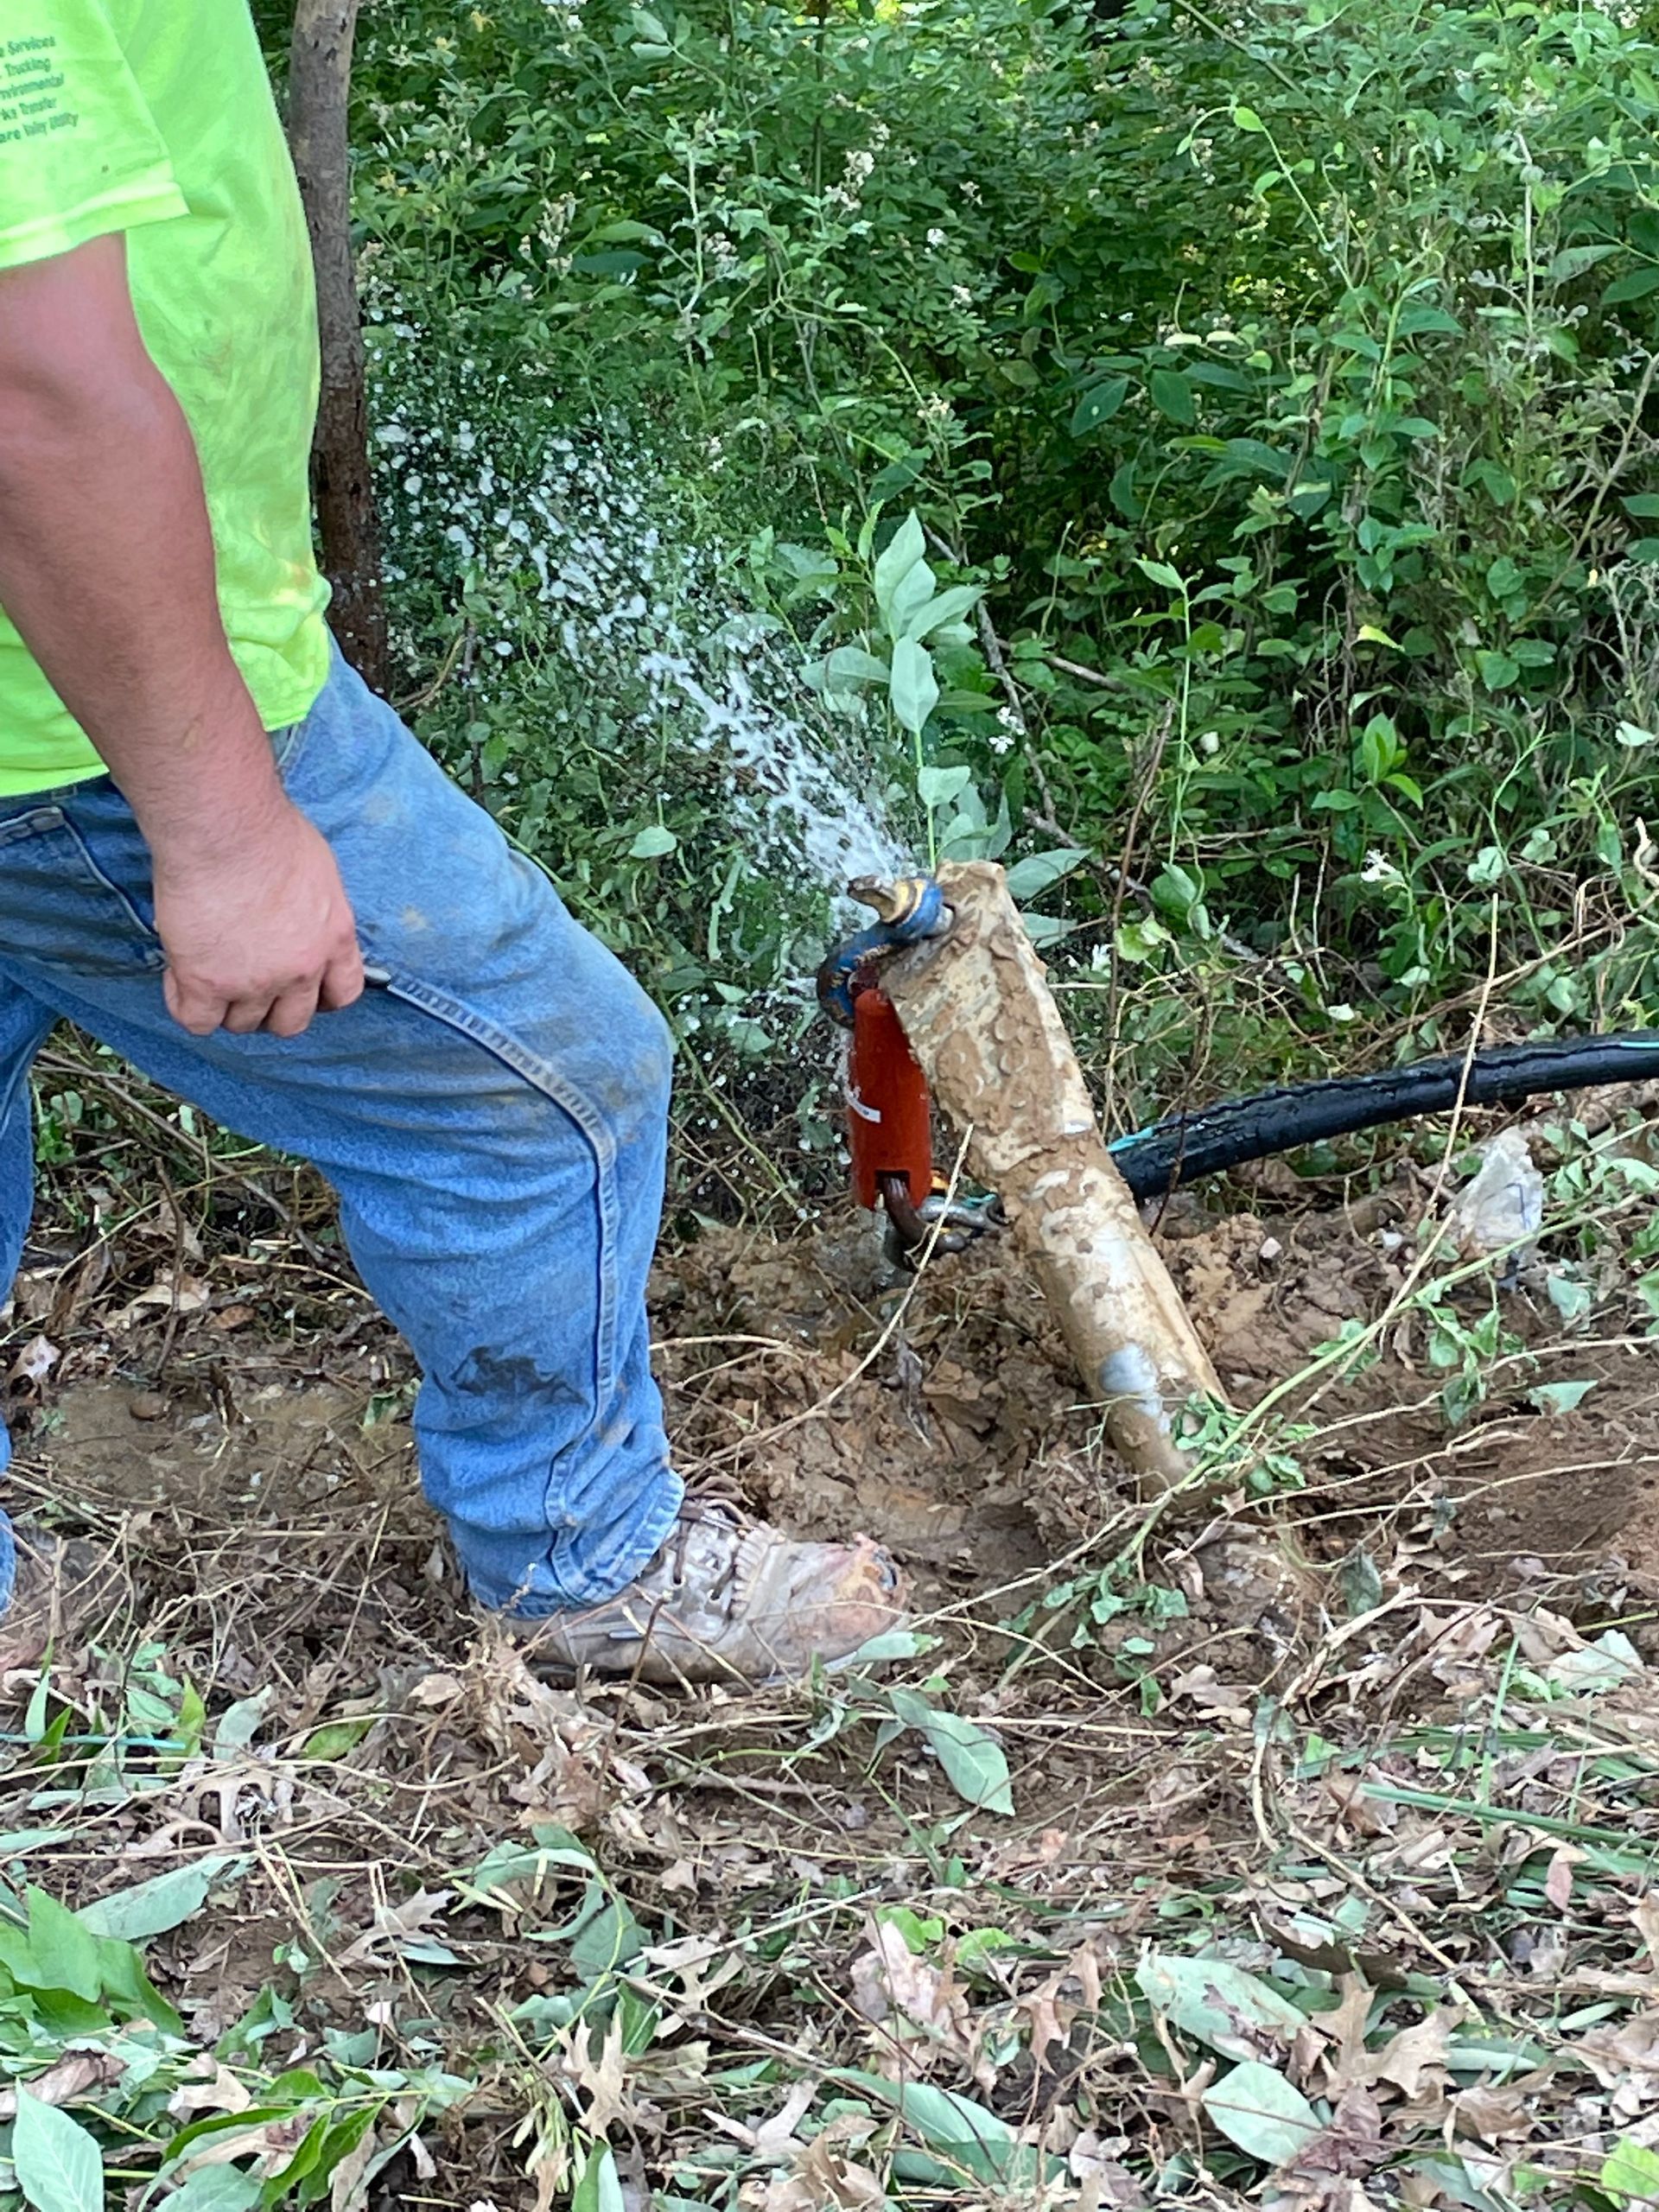  We connected the swivel HDPE pipe and trace wire. A DVUC team member then tested the water jets before pullback.